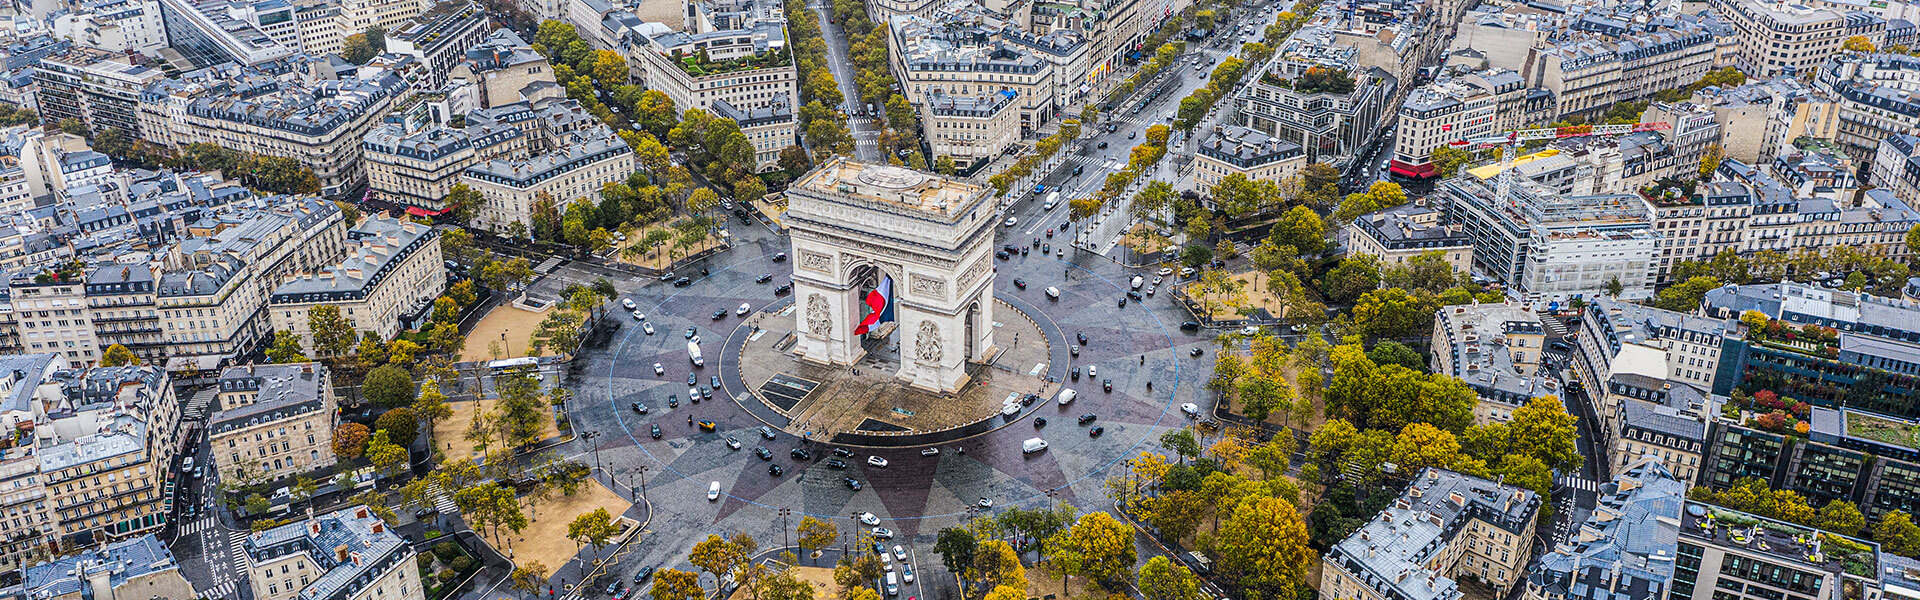 Paris has a long history of being associated with love and romance